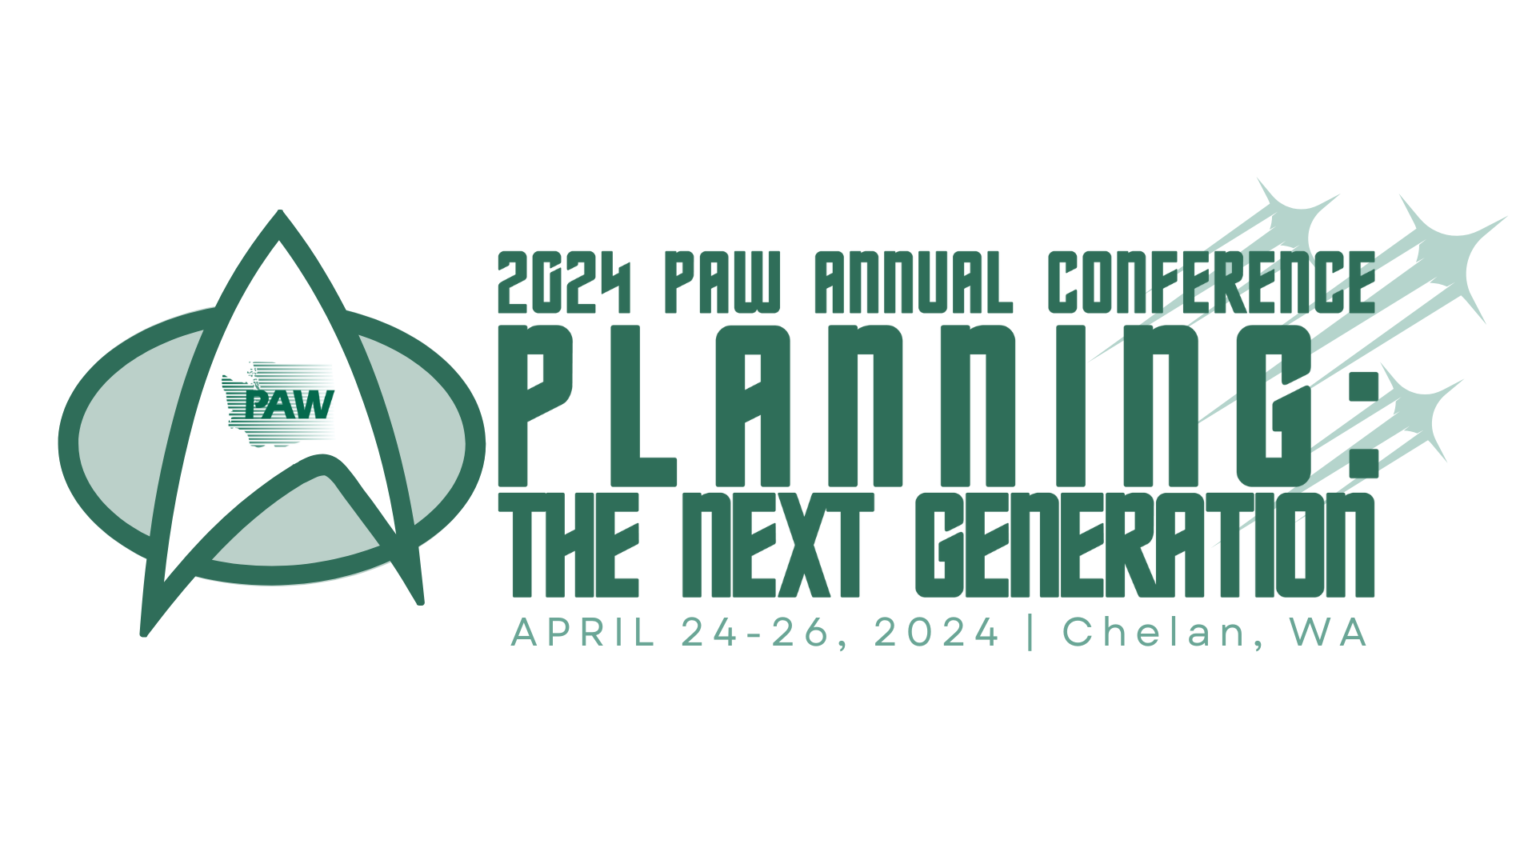 2024 PAW Annual Conference Planning Association of Washington